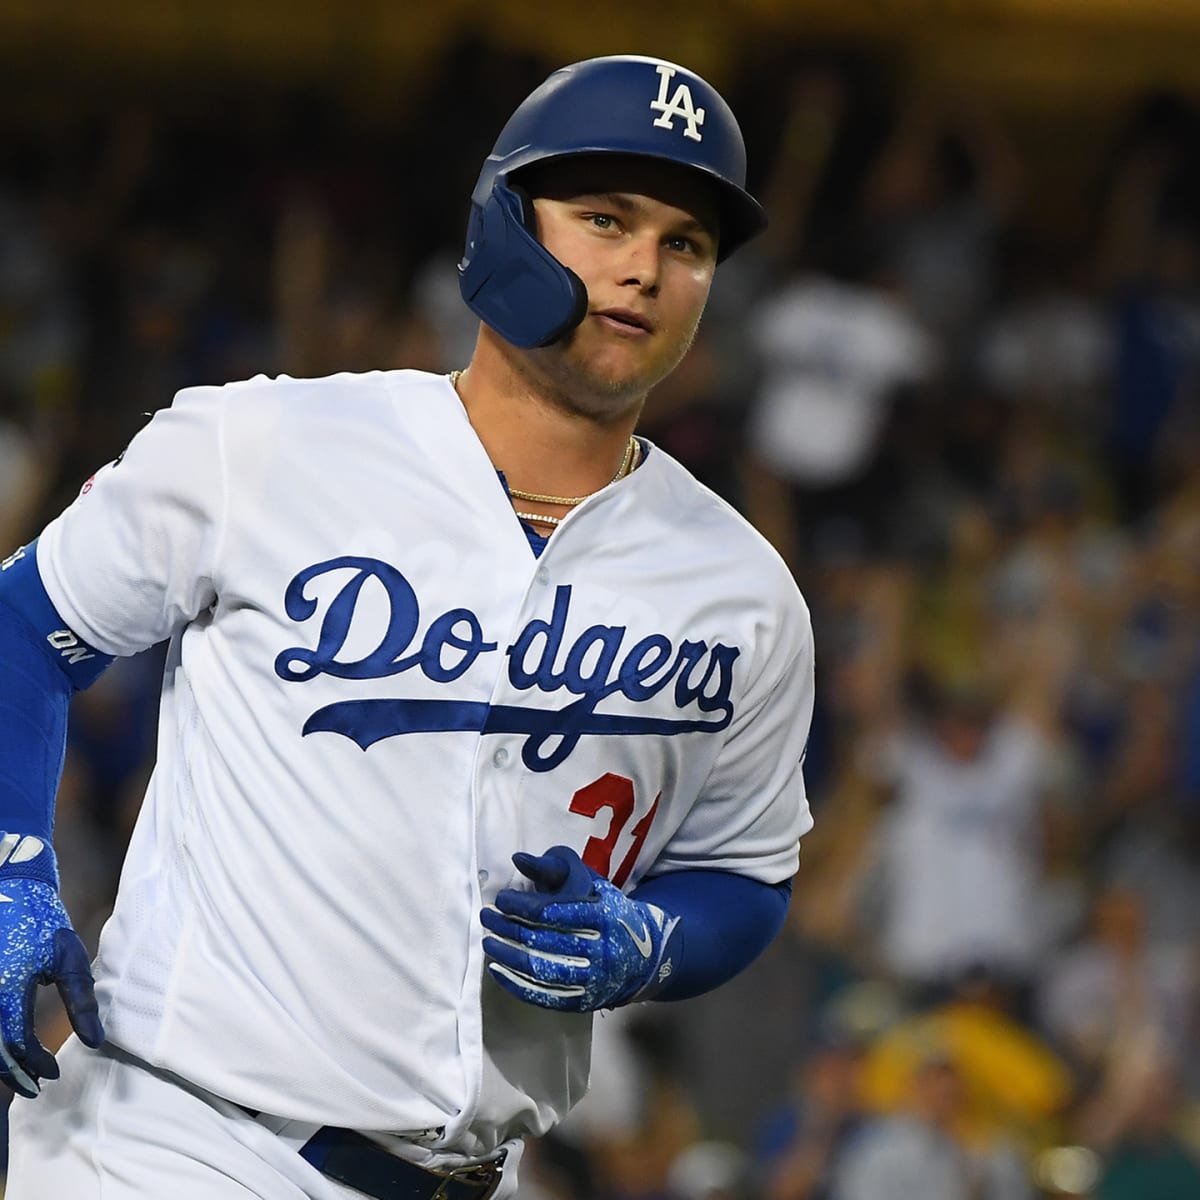 In Joctober, Pederson does it all for Dodgers